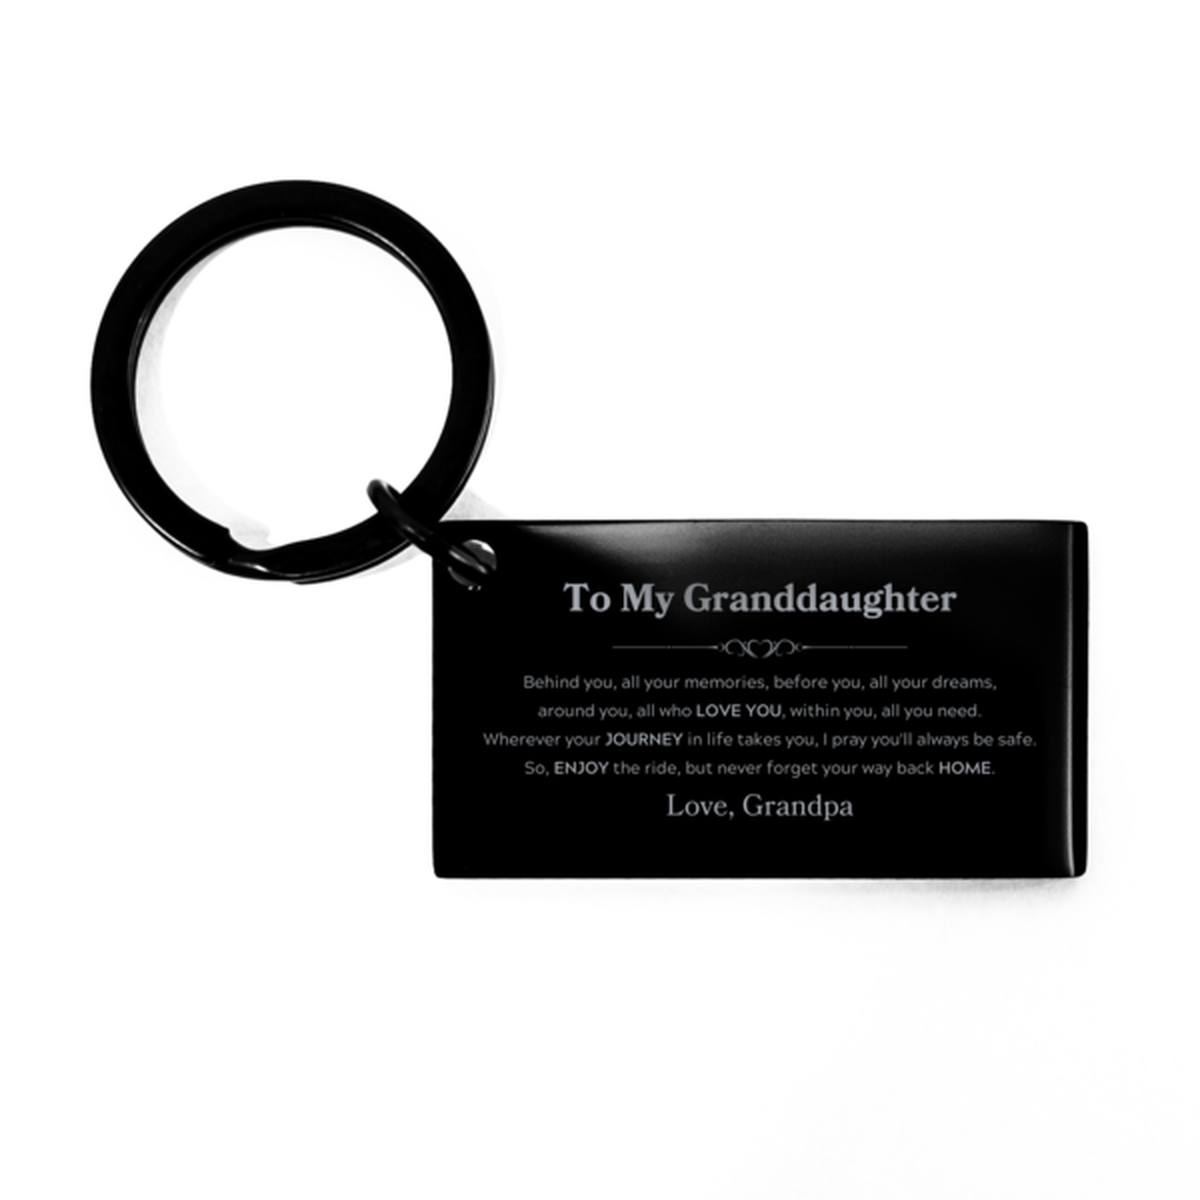 To My Granddaughter Graduation Gifts from Grandpa, Granddaughter Keychain Christmas Birthday Gifts for Granddaughter Behind you, all your memories, before you, all your dreams. Love, Grandpa